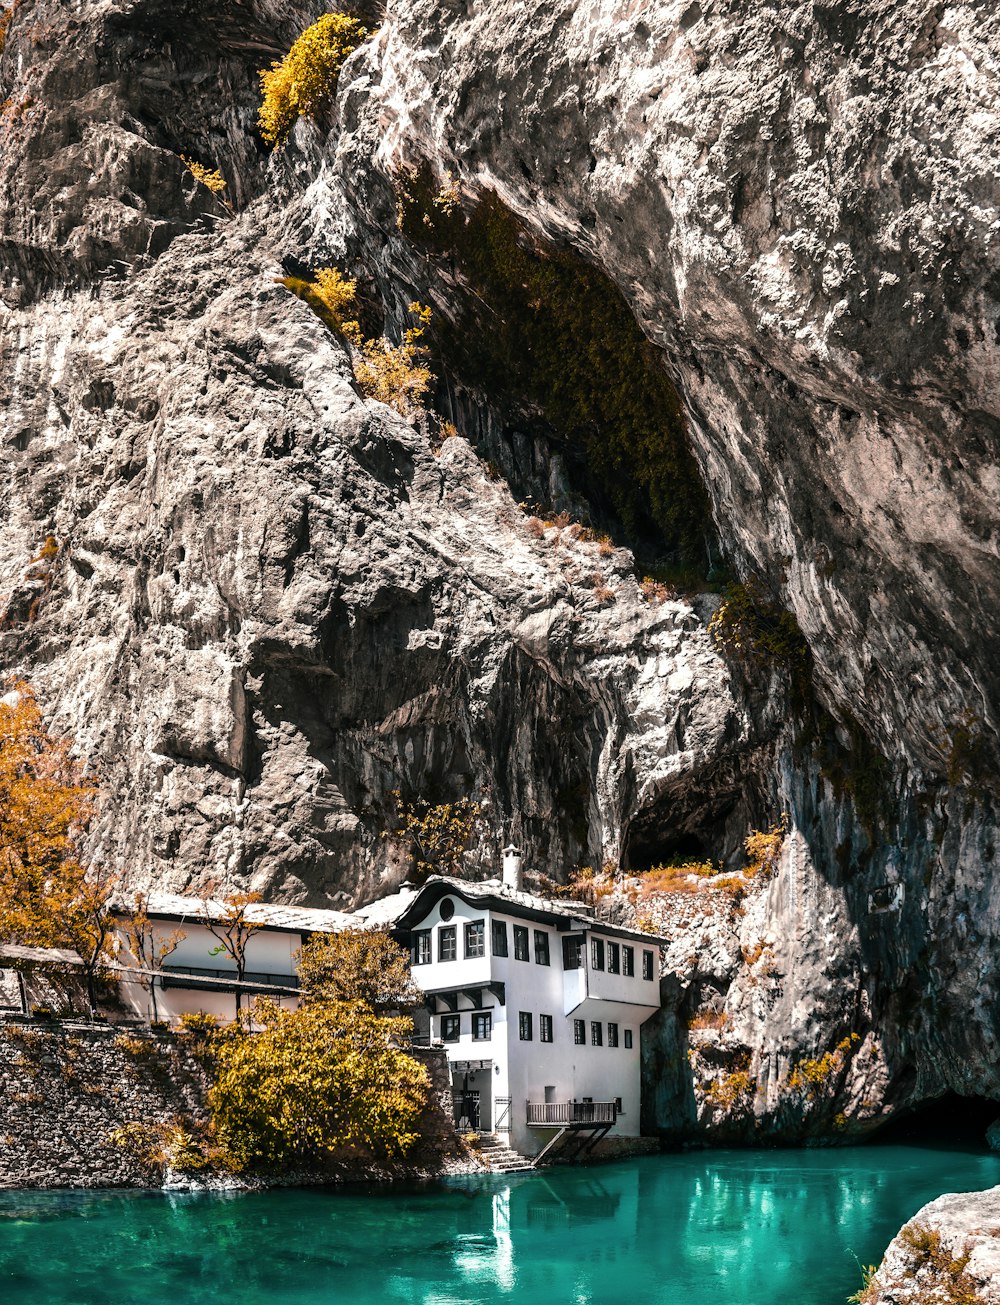 a house on the side of a mountain next to a body of water